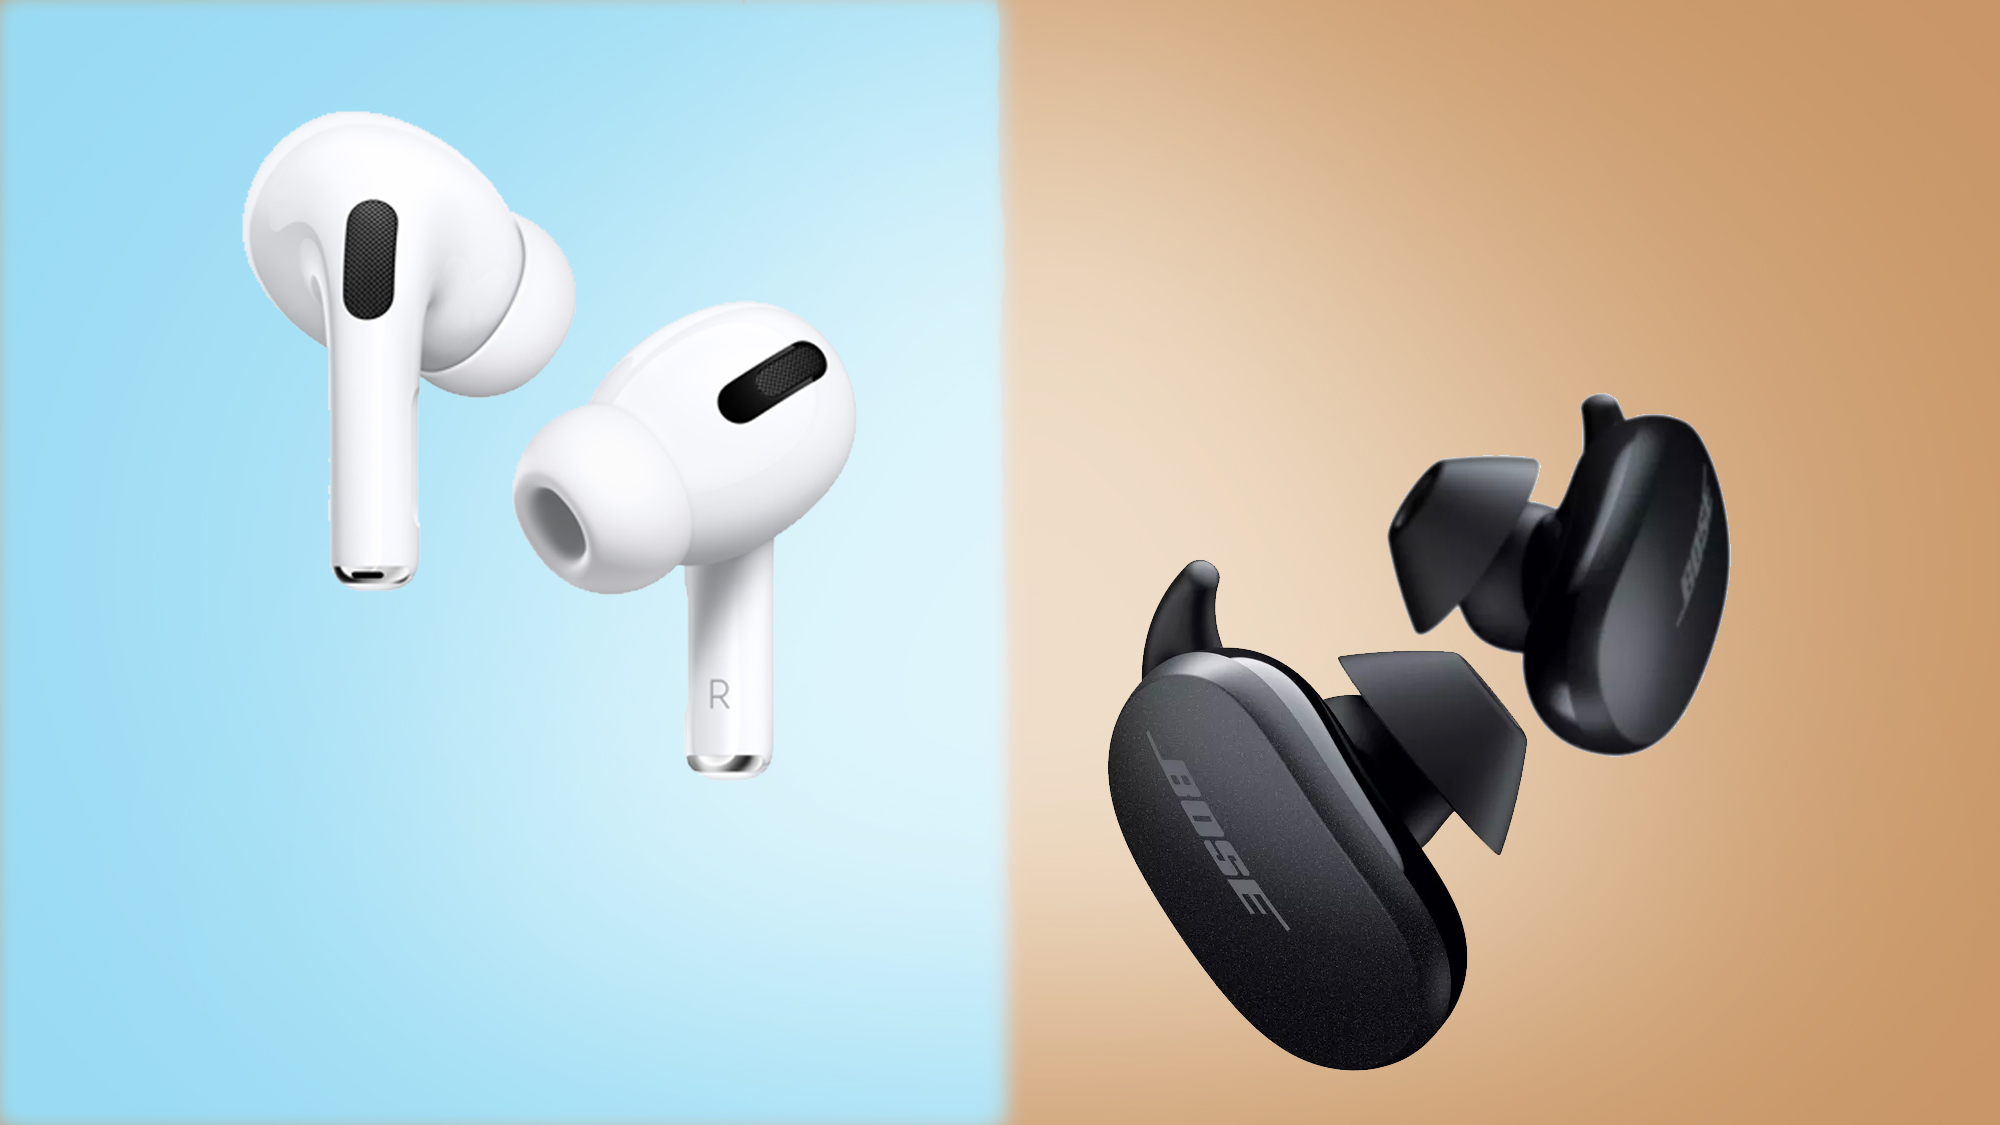 Apple AirPods Pro vs Bose QuietComfort Earbuds: which noise-cancelling earbuds are best?